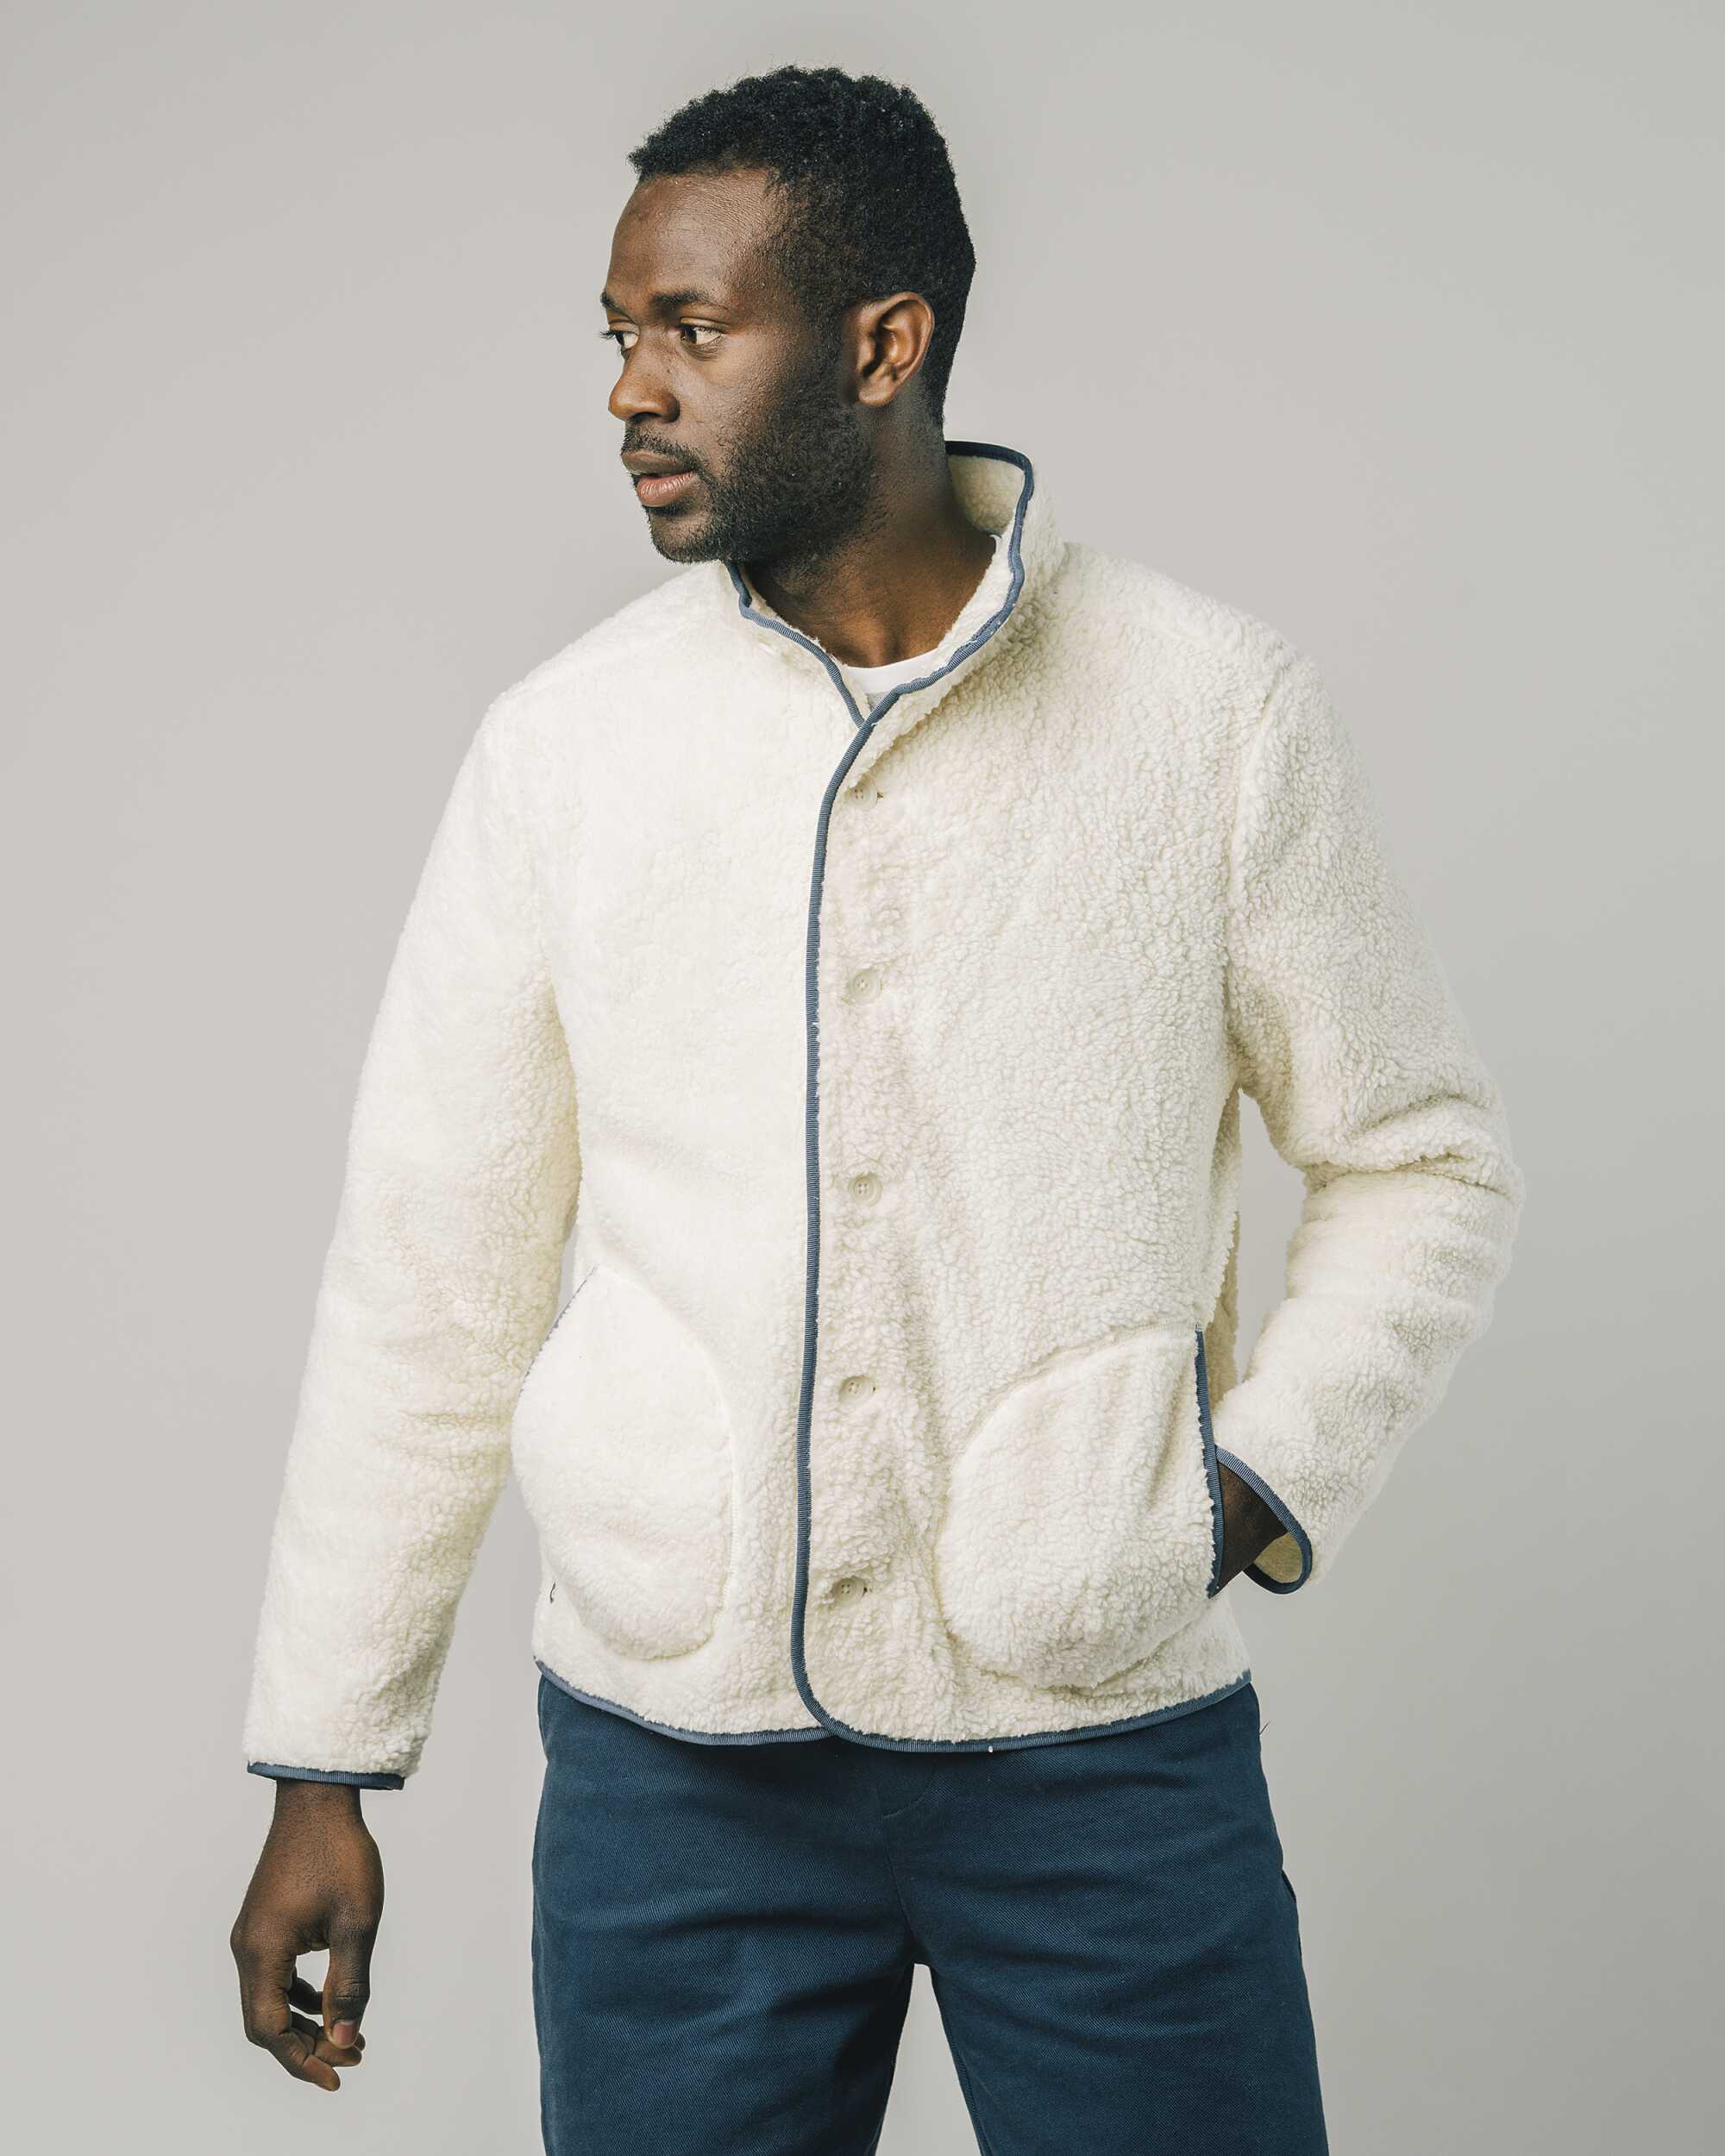 Fleece jacket in off-white / beige made from 100% organic cotton from Brava Fabrics